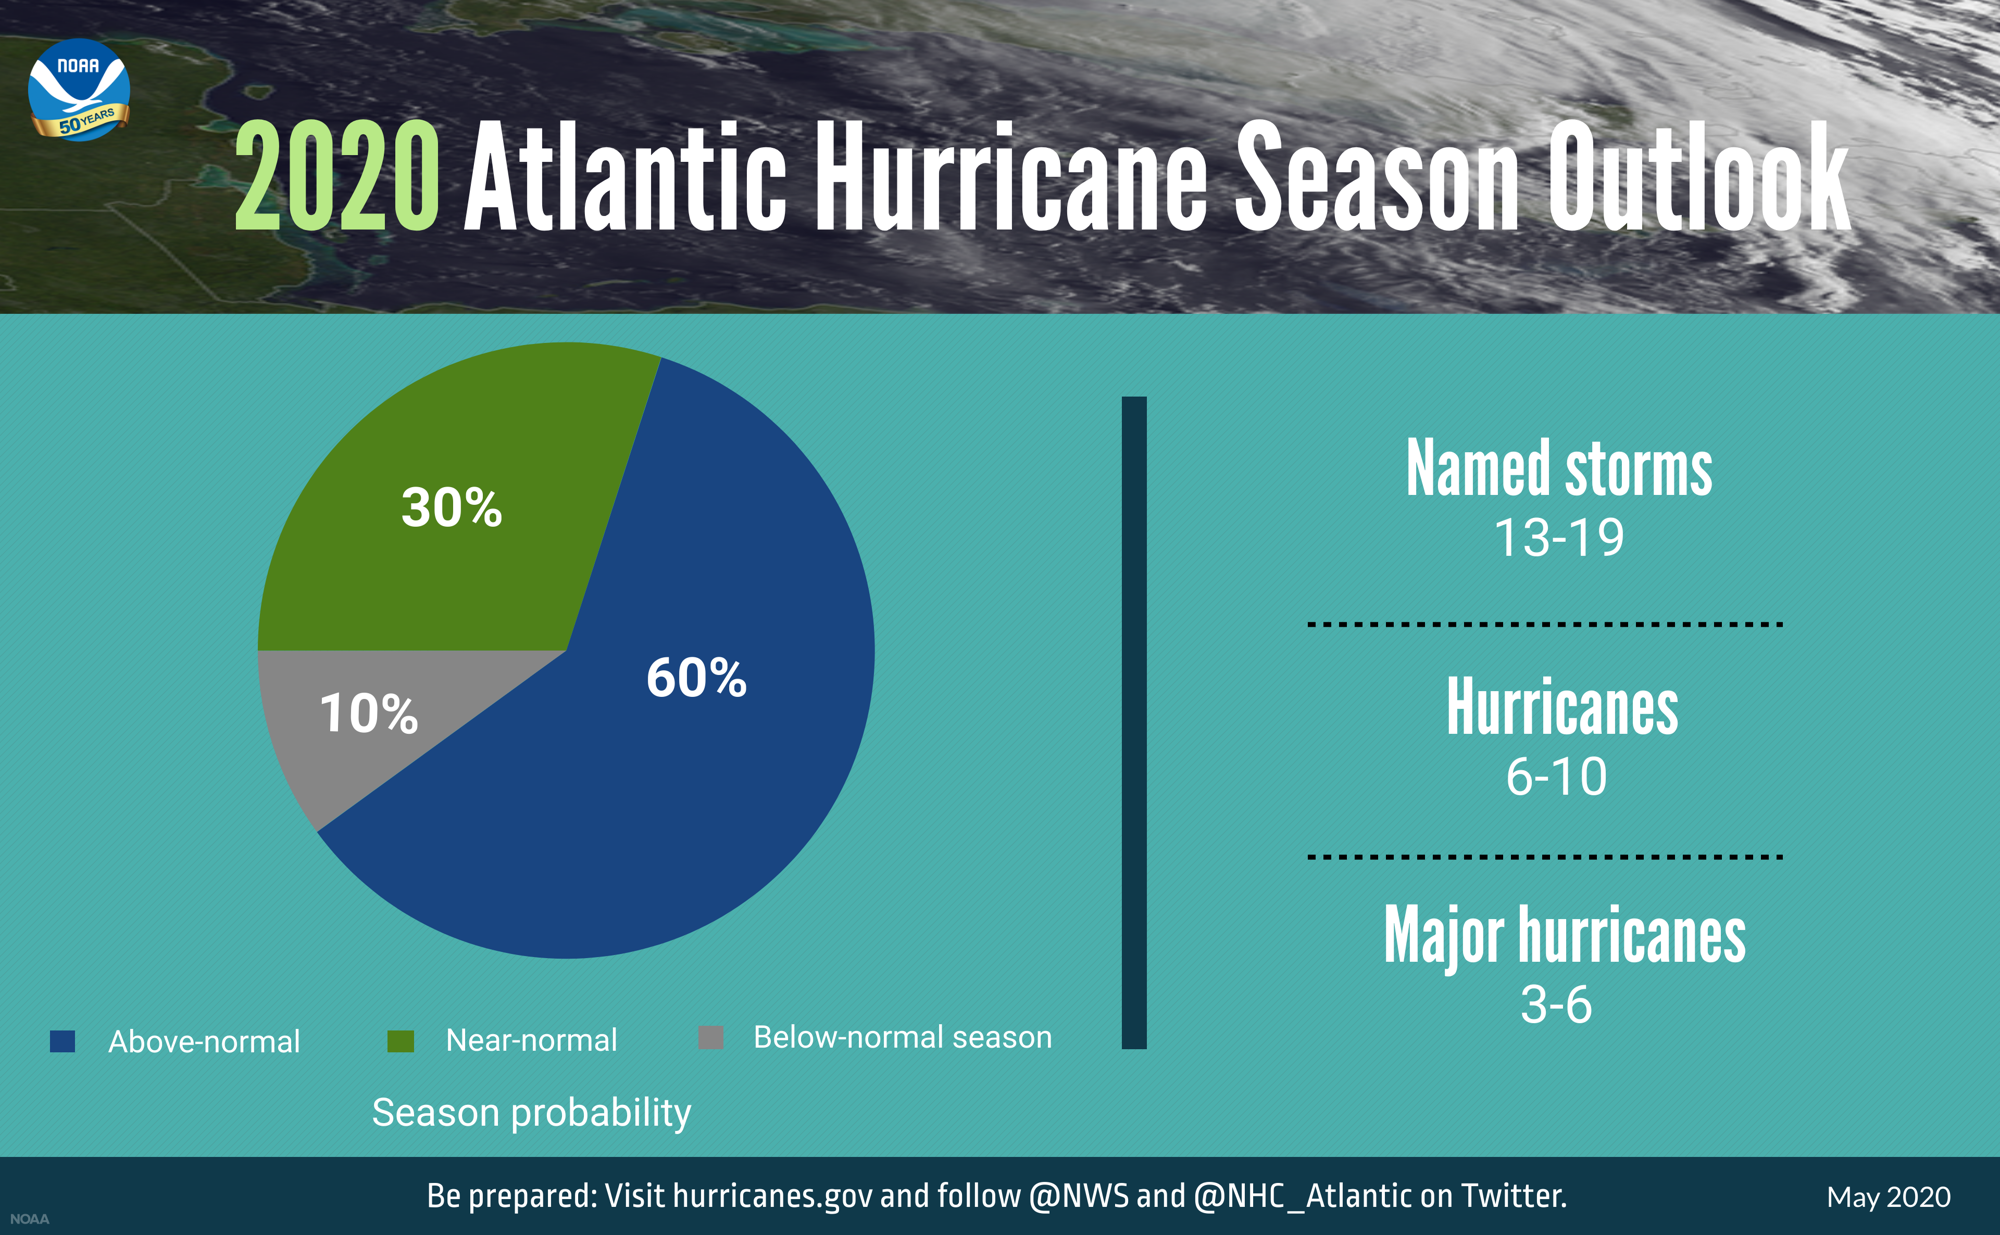 NOAA is predicting an above-normal hurricane season for 2020. Infographic courtesy of NOAA